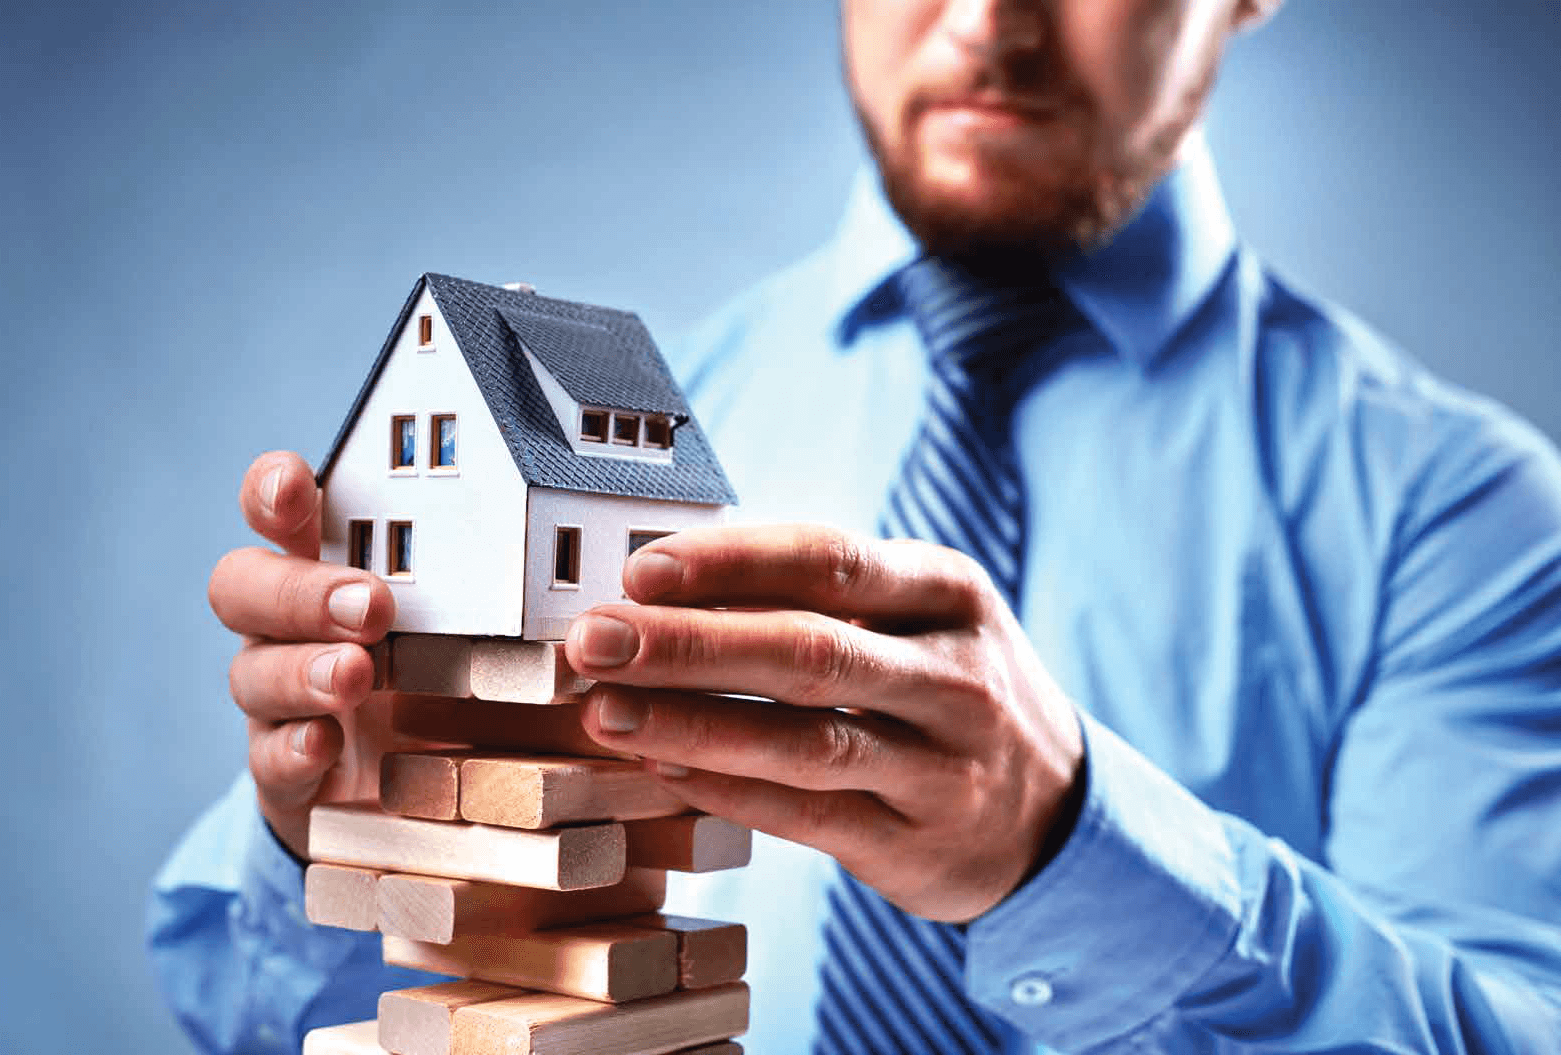 Balancing Act: How To Handle Housing Market